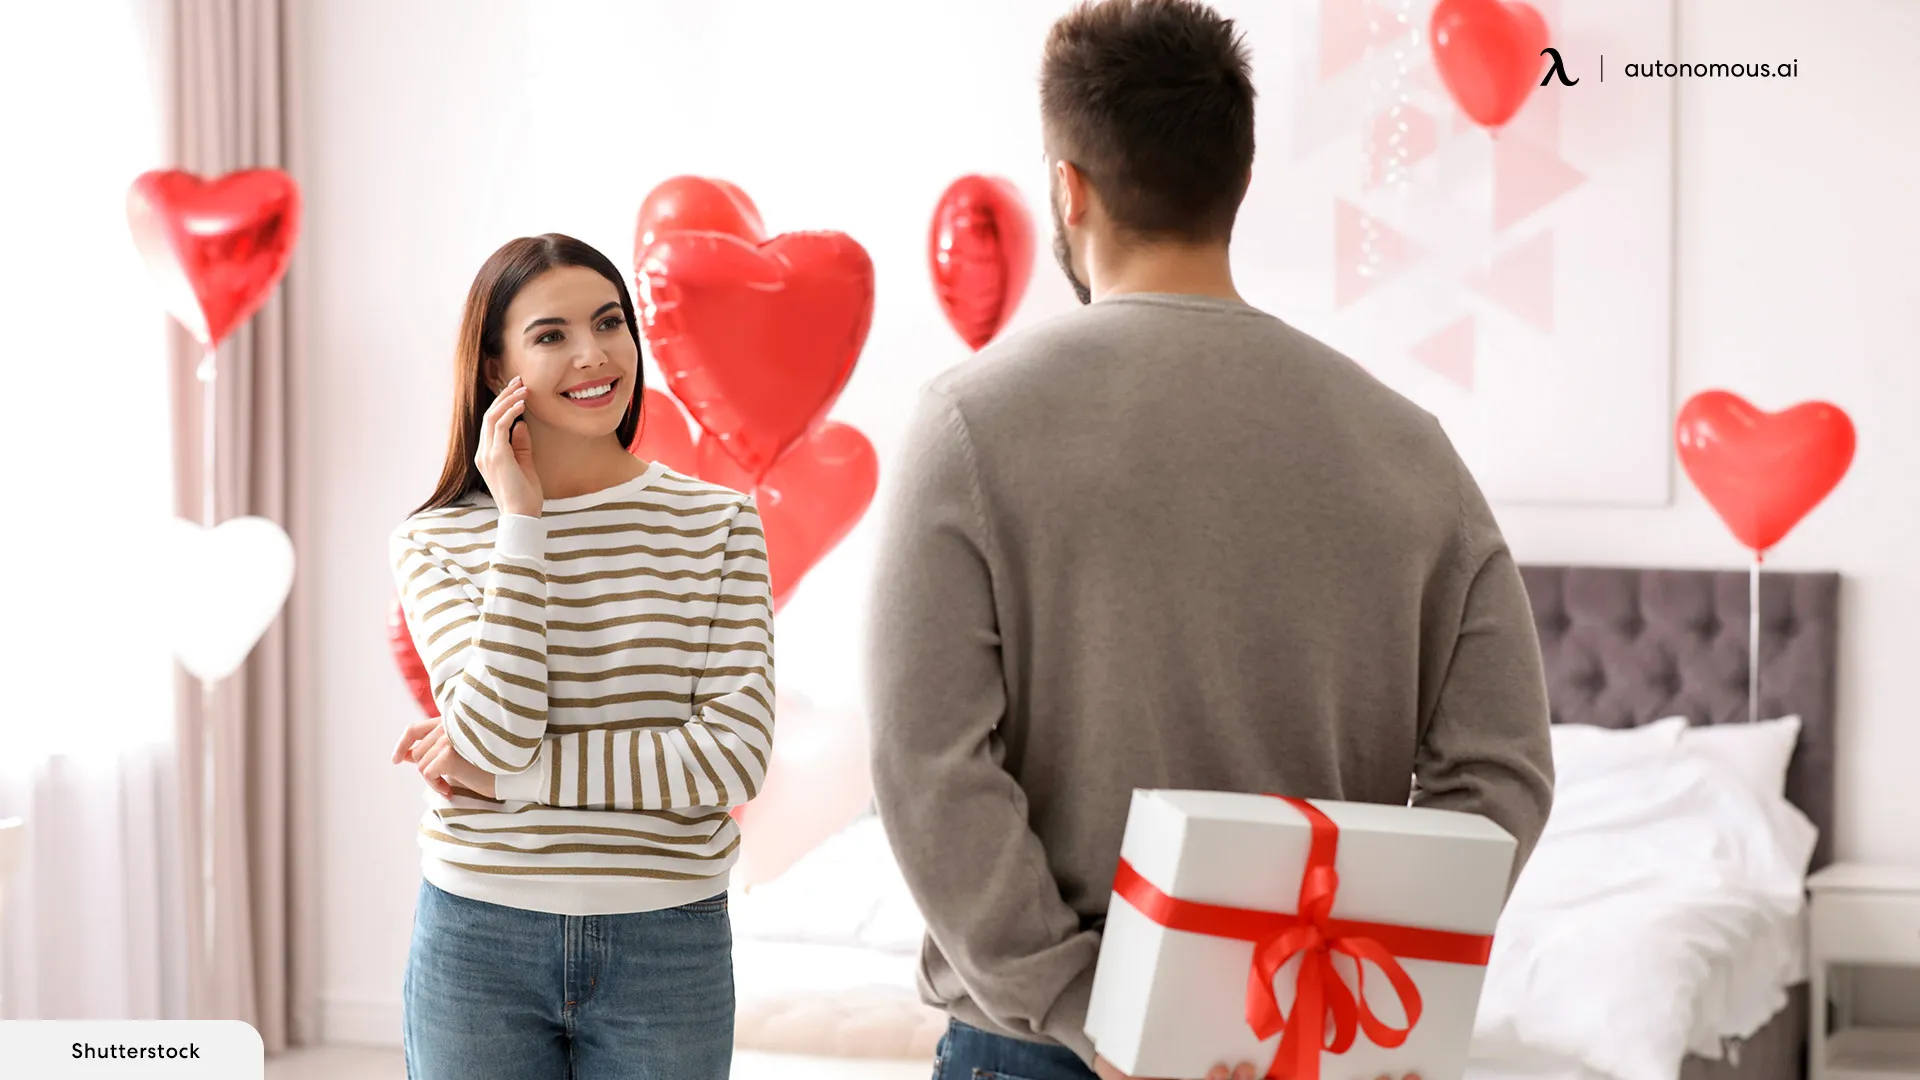 20 Unique Ideas for Personalized Valentine's Day Gifts